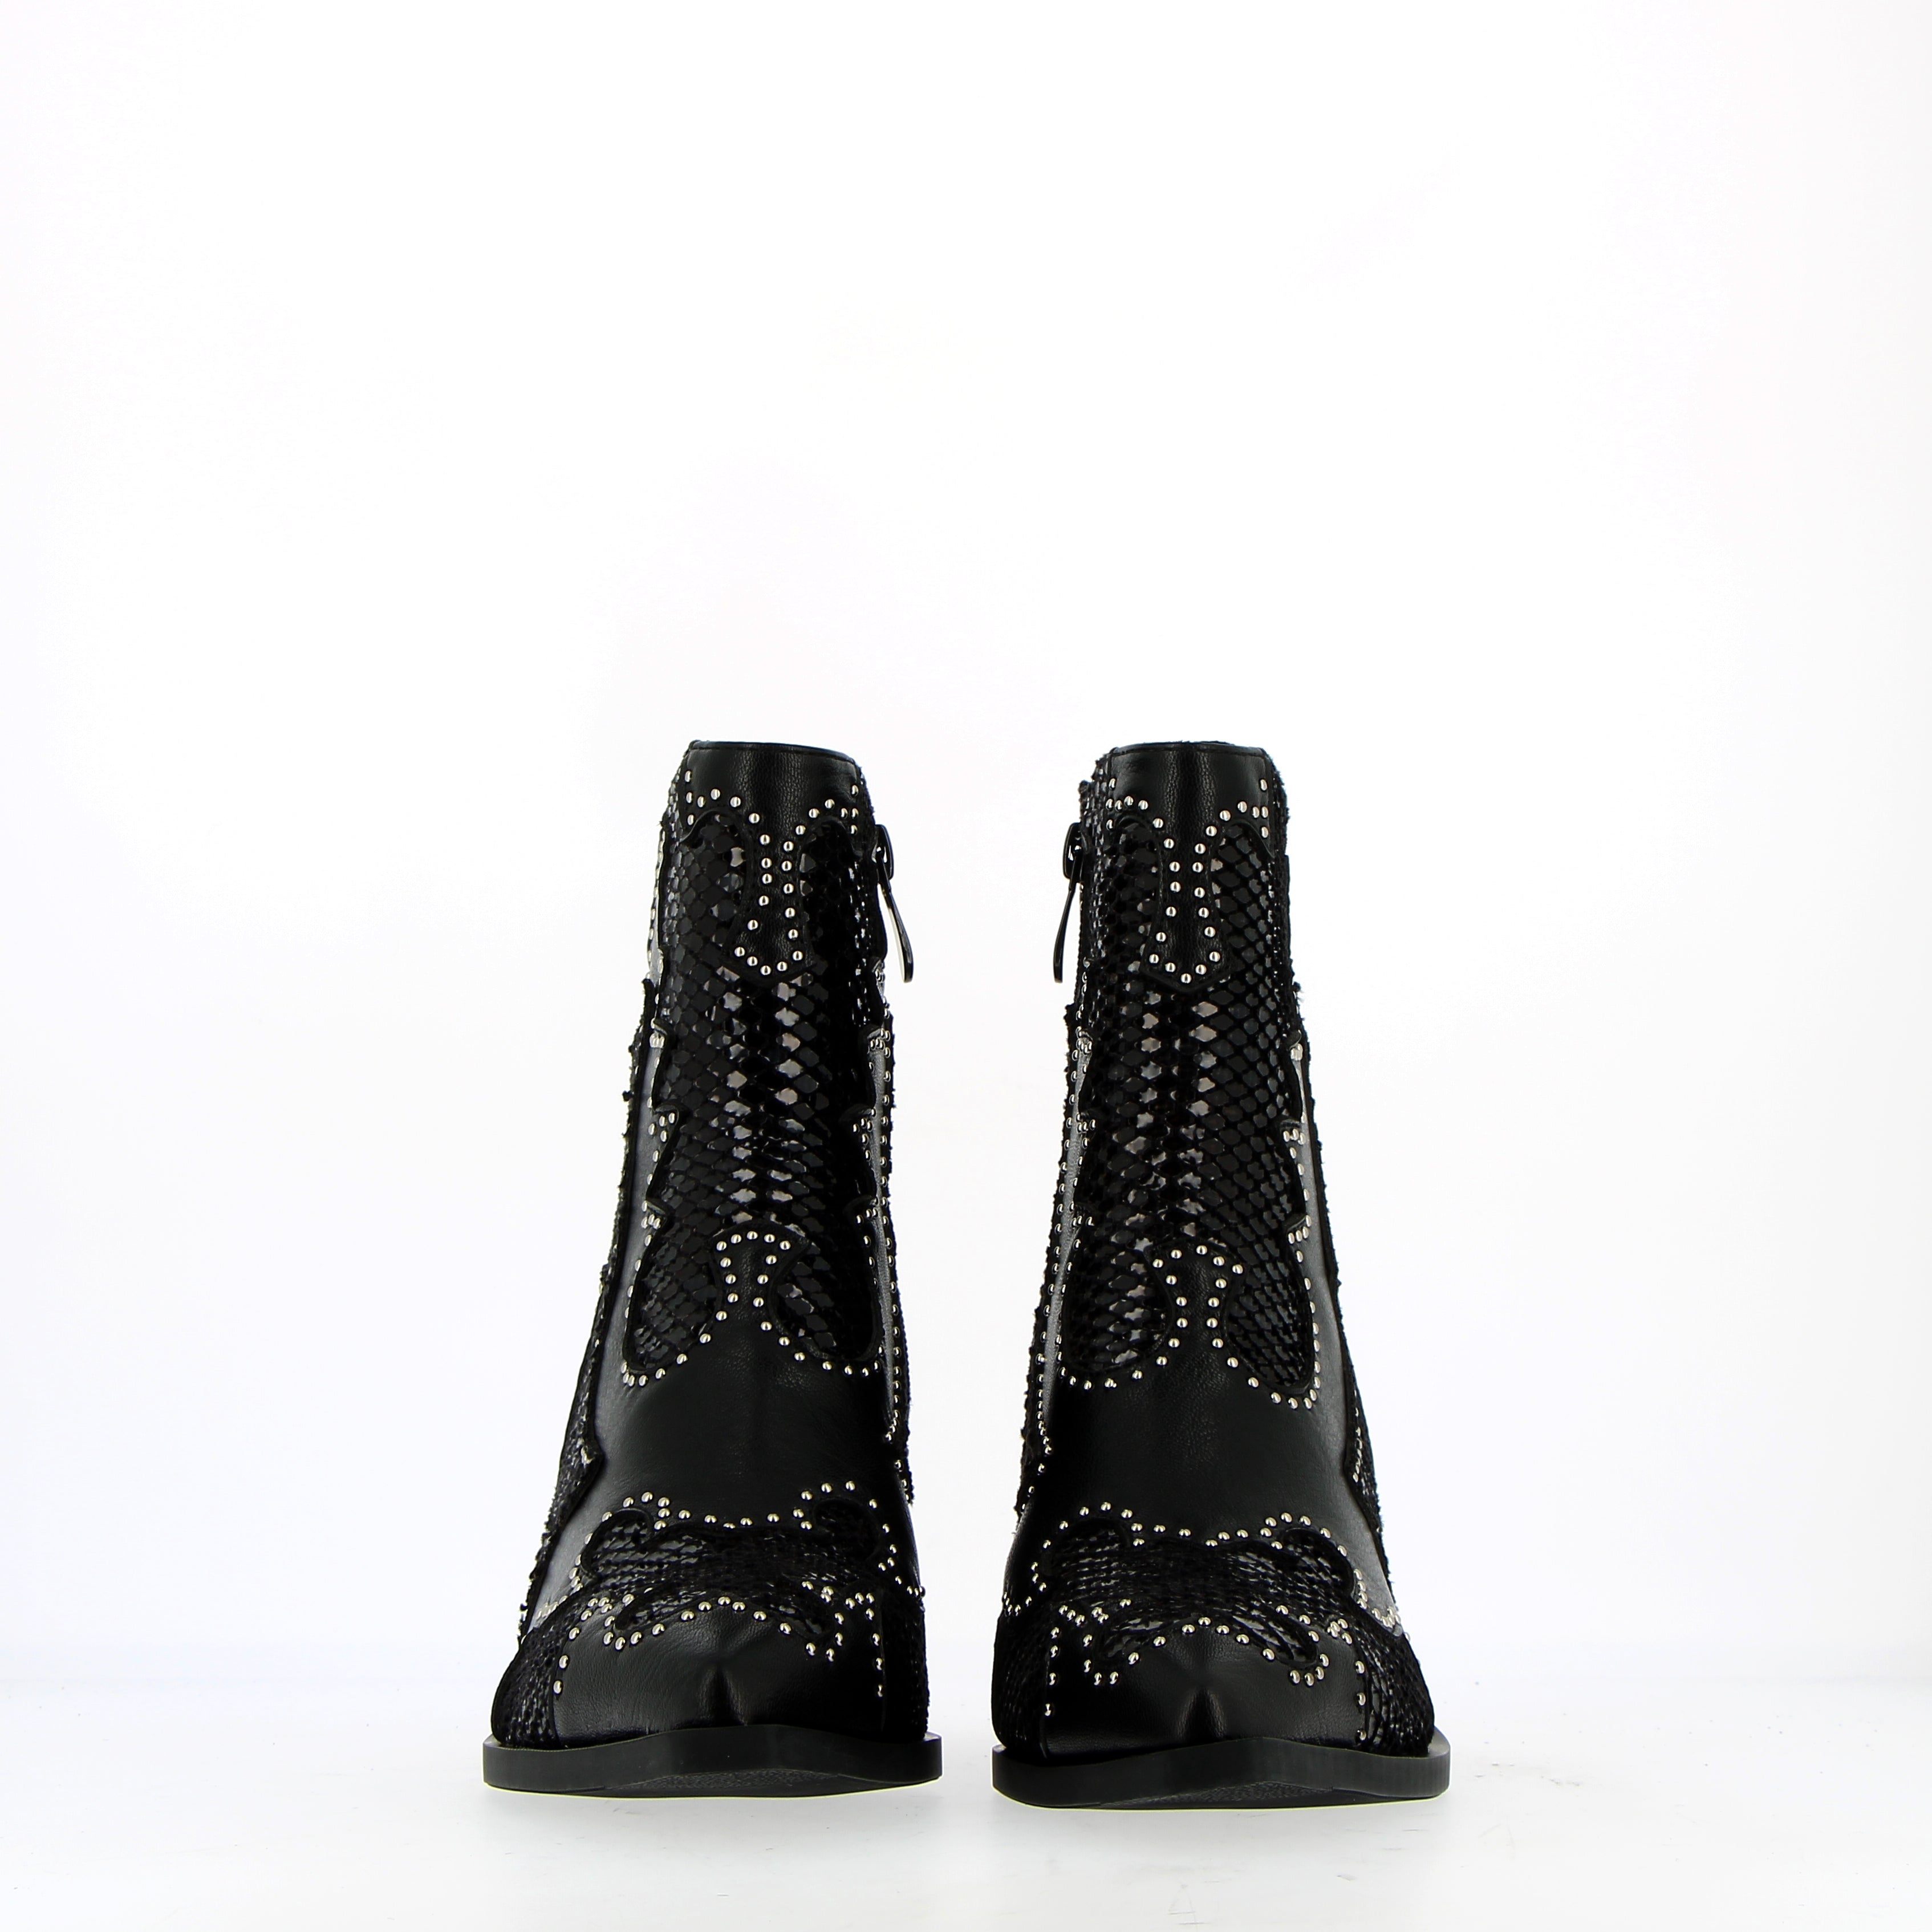 Black ankle boot and studded snake